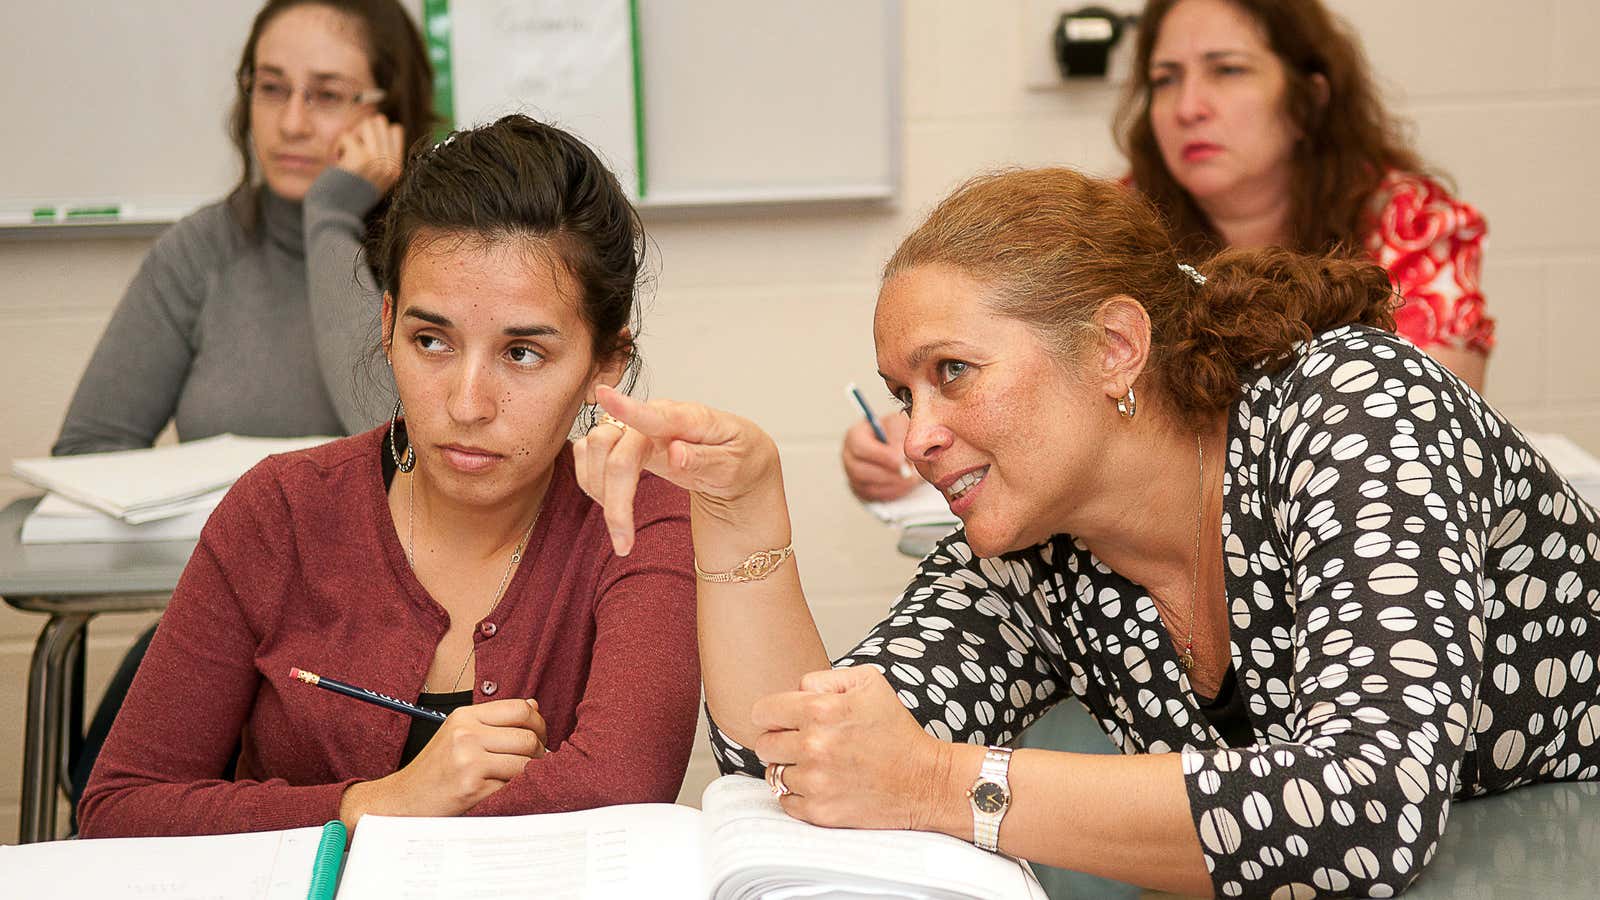 A math class for DREAMers in Georgia. Giving a legal status to undocumented immigrants will open a slew of opportunities to them—and their communities.